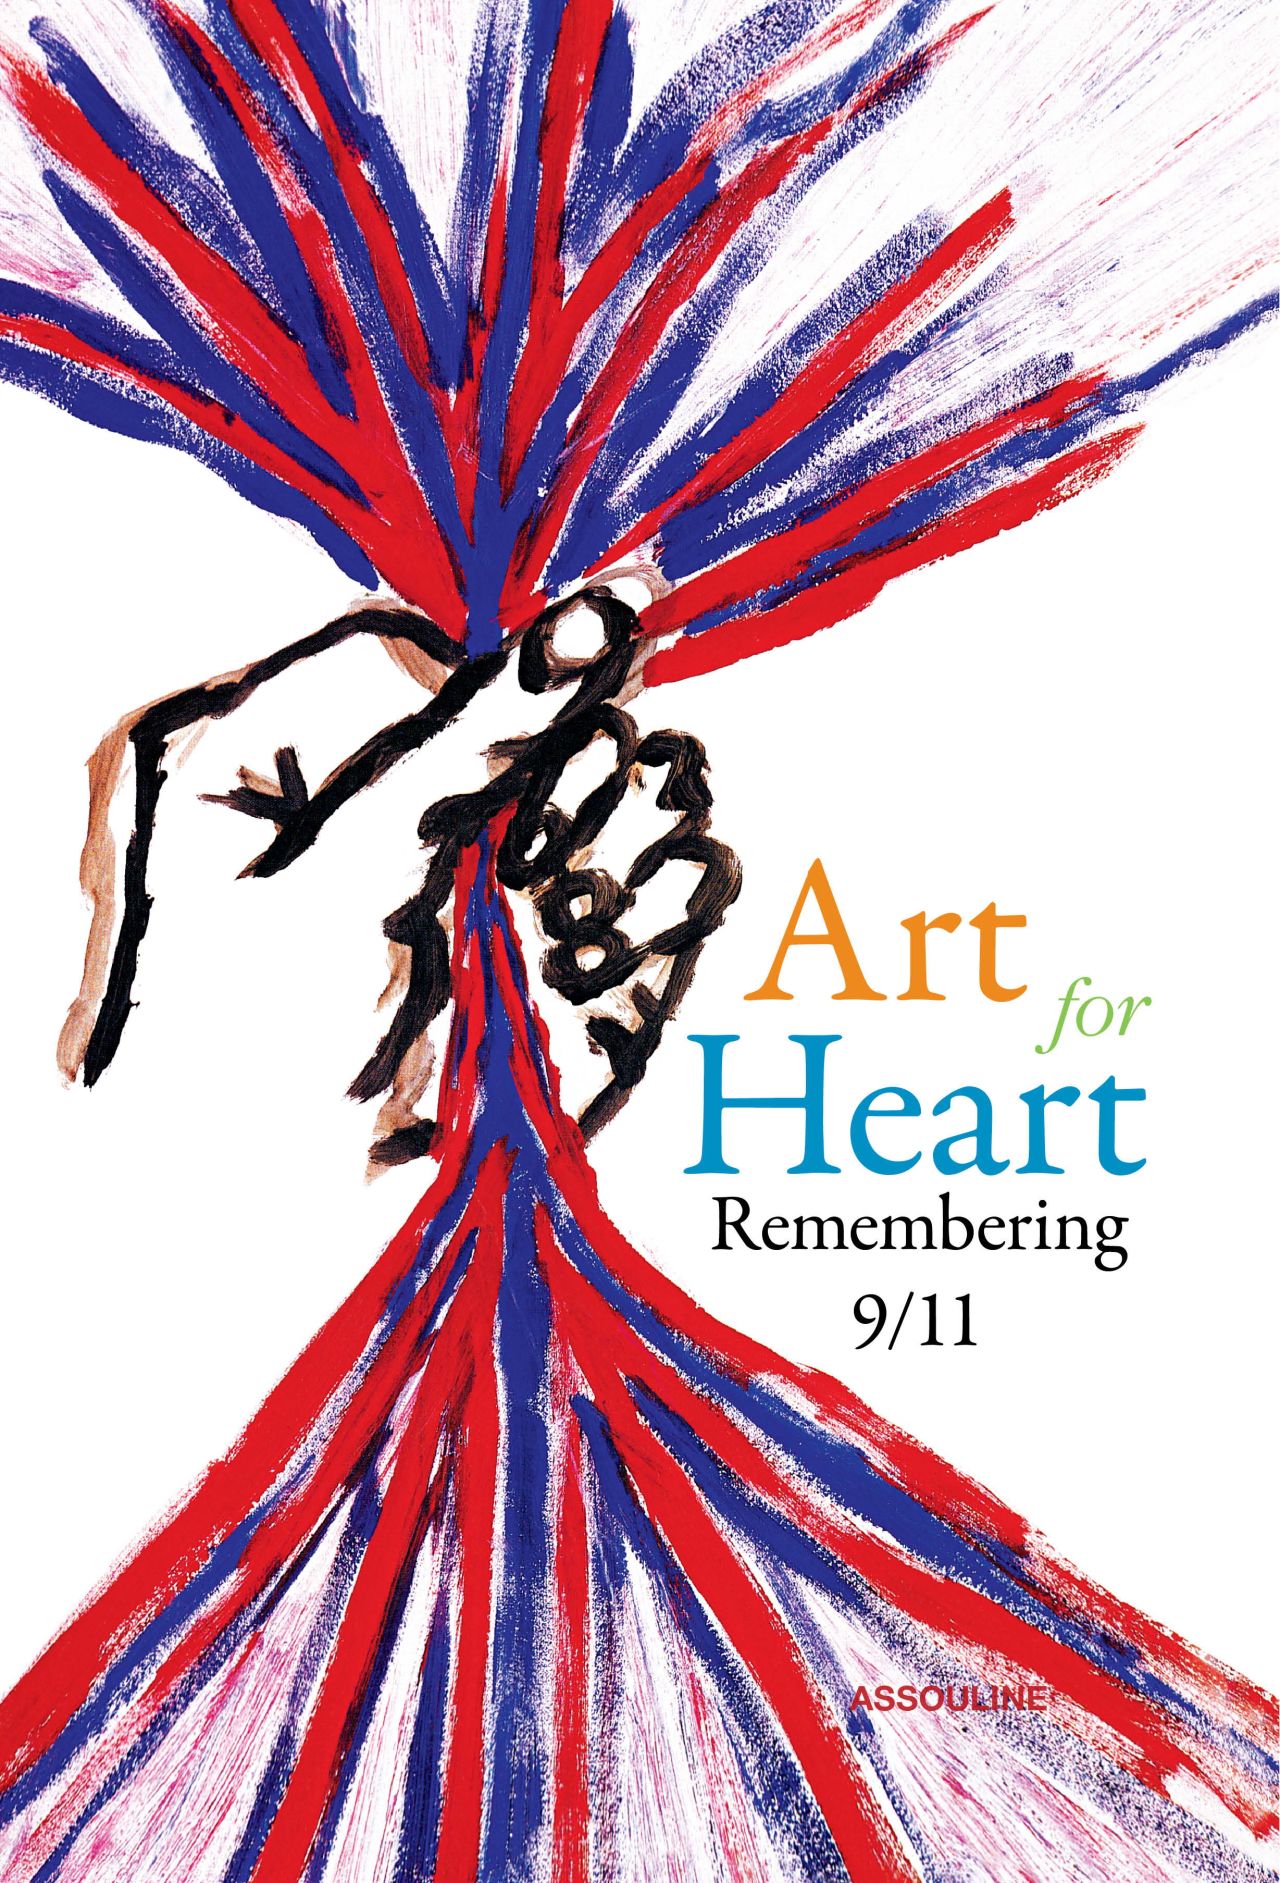 Children's artwork covers the book, "Art for Heart: Remembering 9/11," which contains the collection of drawings. 